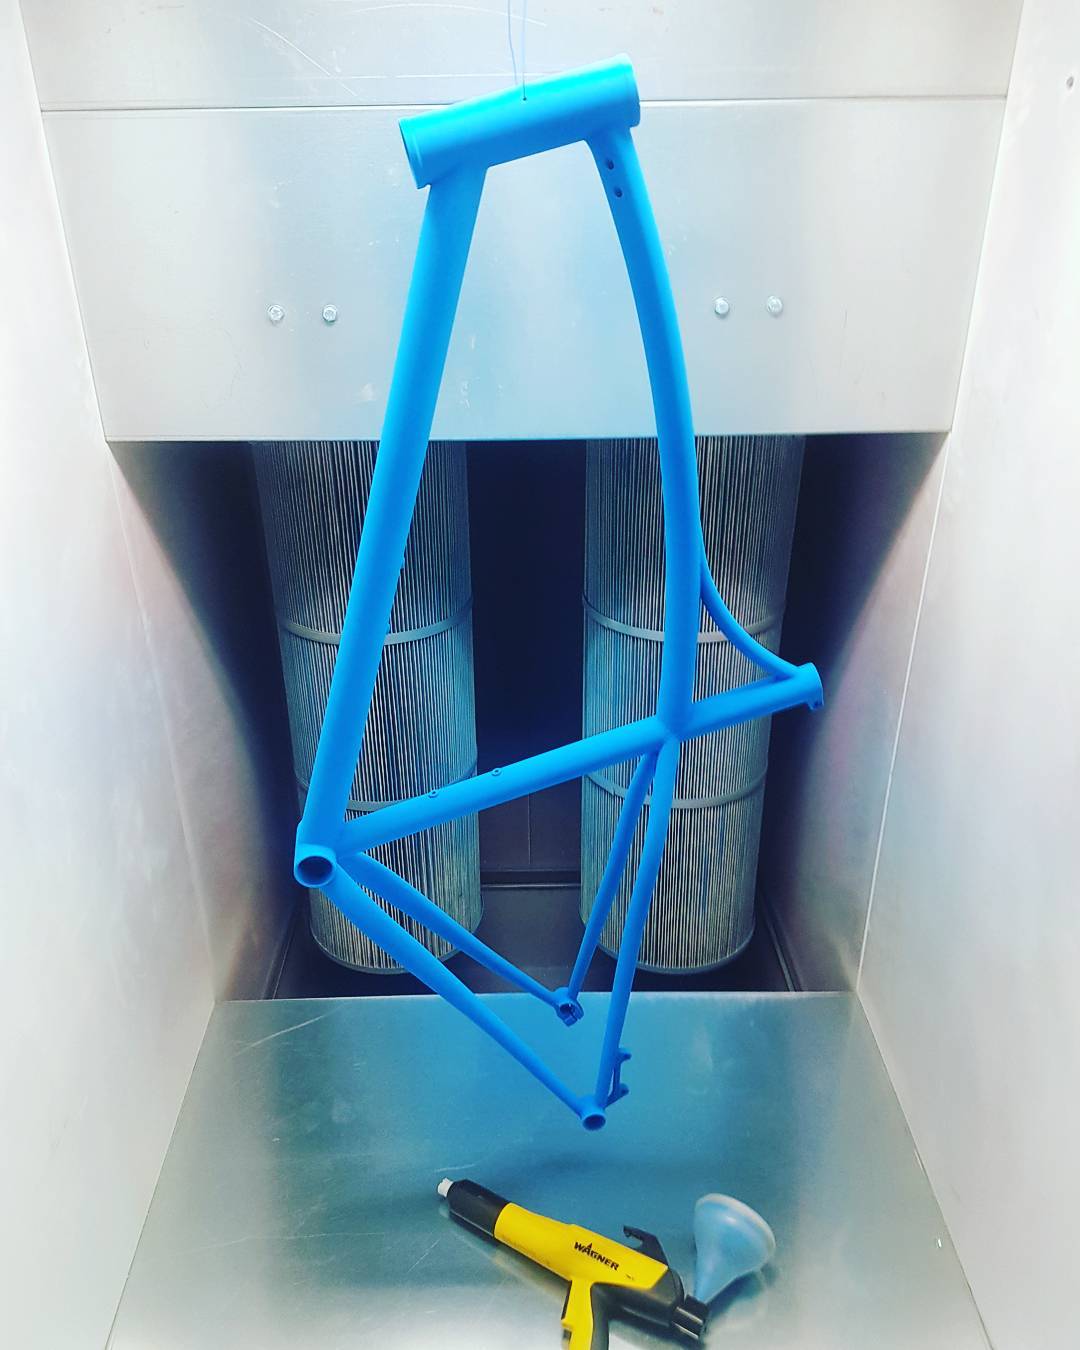 #gravel #bespoked ral5017 just #powdercoated